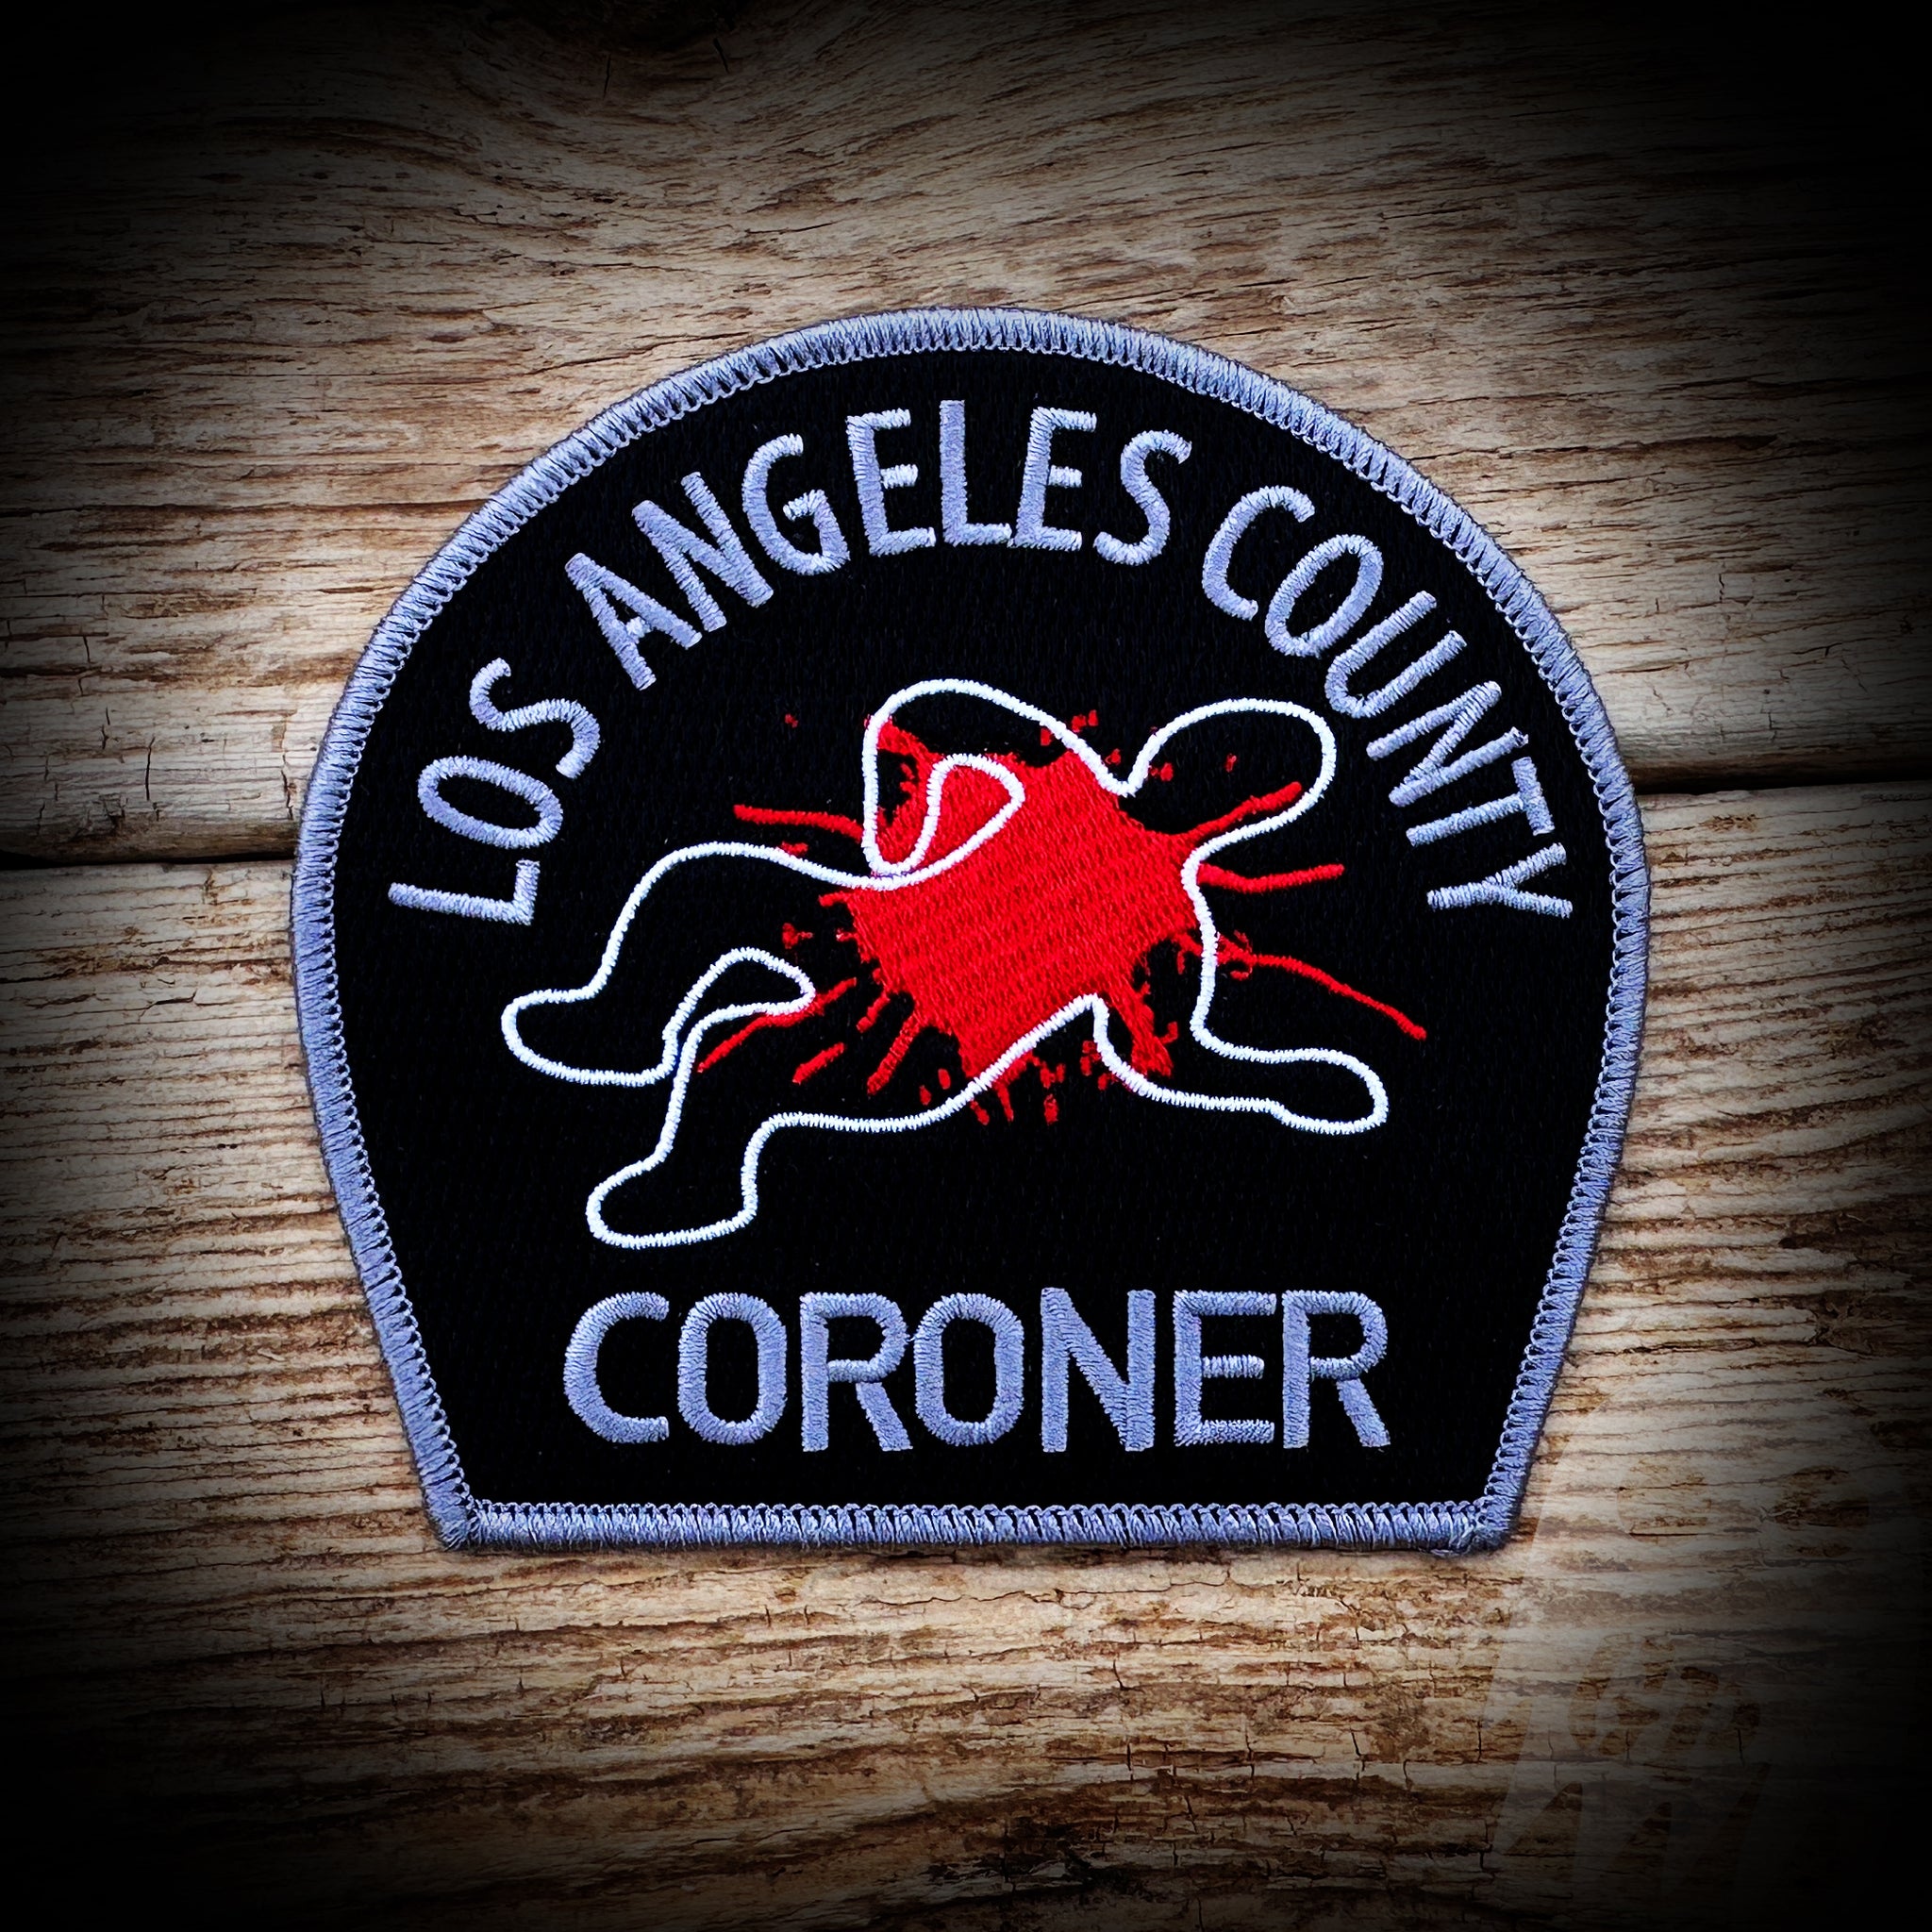 Standard - Los Angeles County Coroner Patch